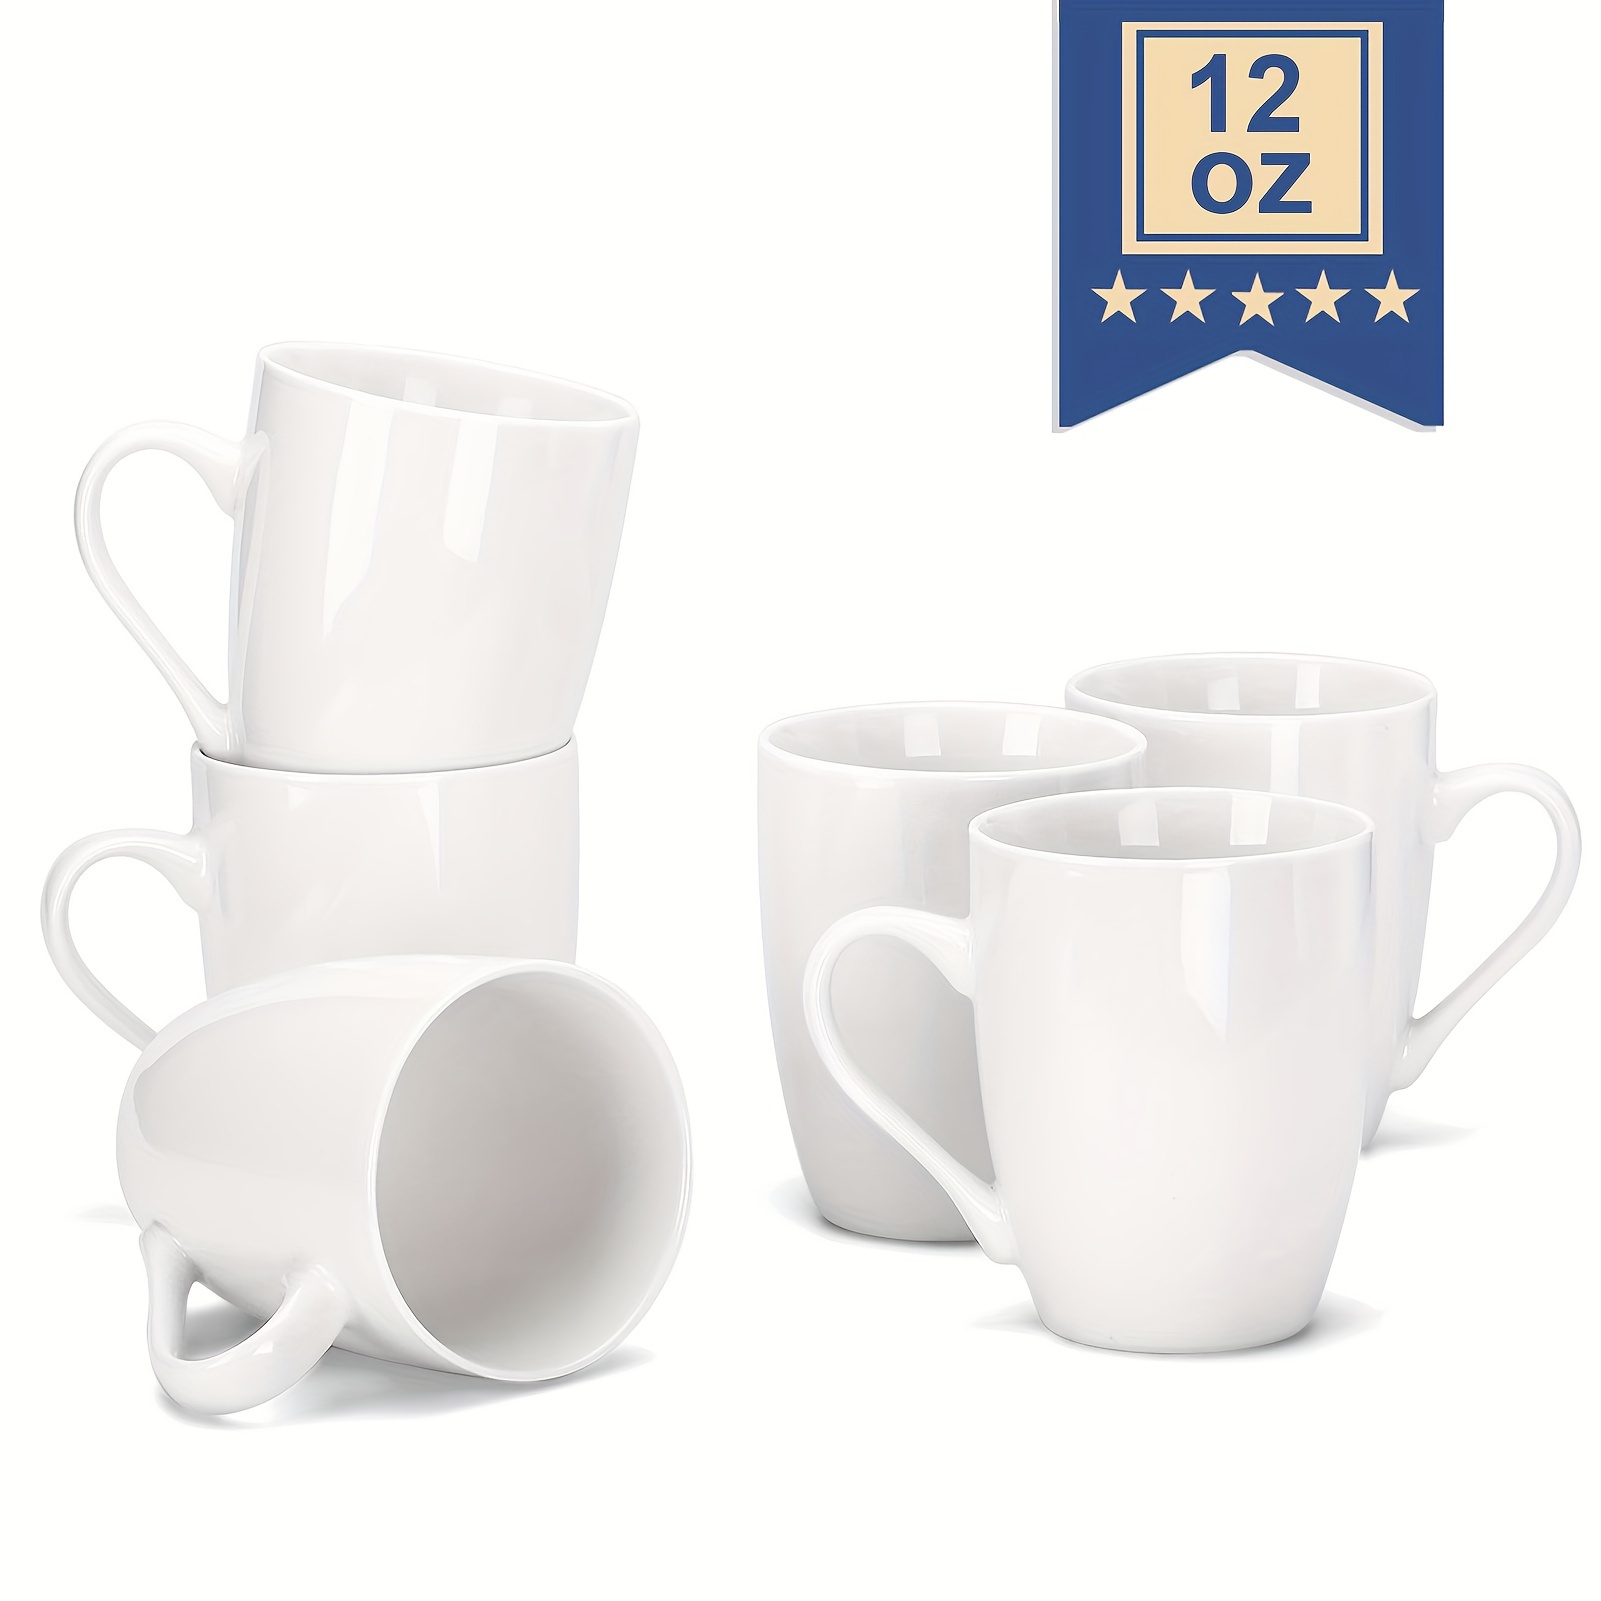 

6pcs, Coffee Mugs, Porcelain Mugs, 12 Ounce For Coffee, Tea, Cocoa, Cappuccino, Latte And Milk, Large Handle Design, Microwave And Dishwasher Safe, White